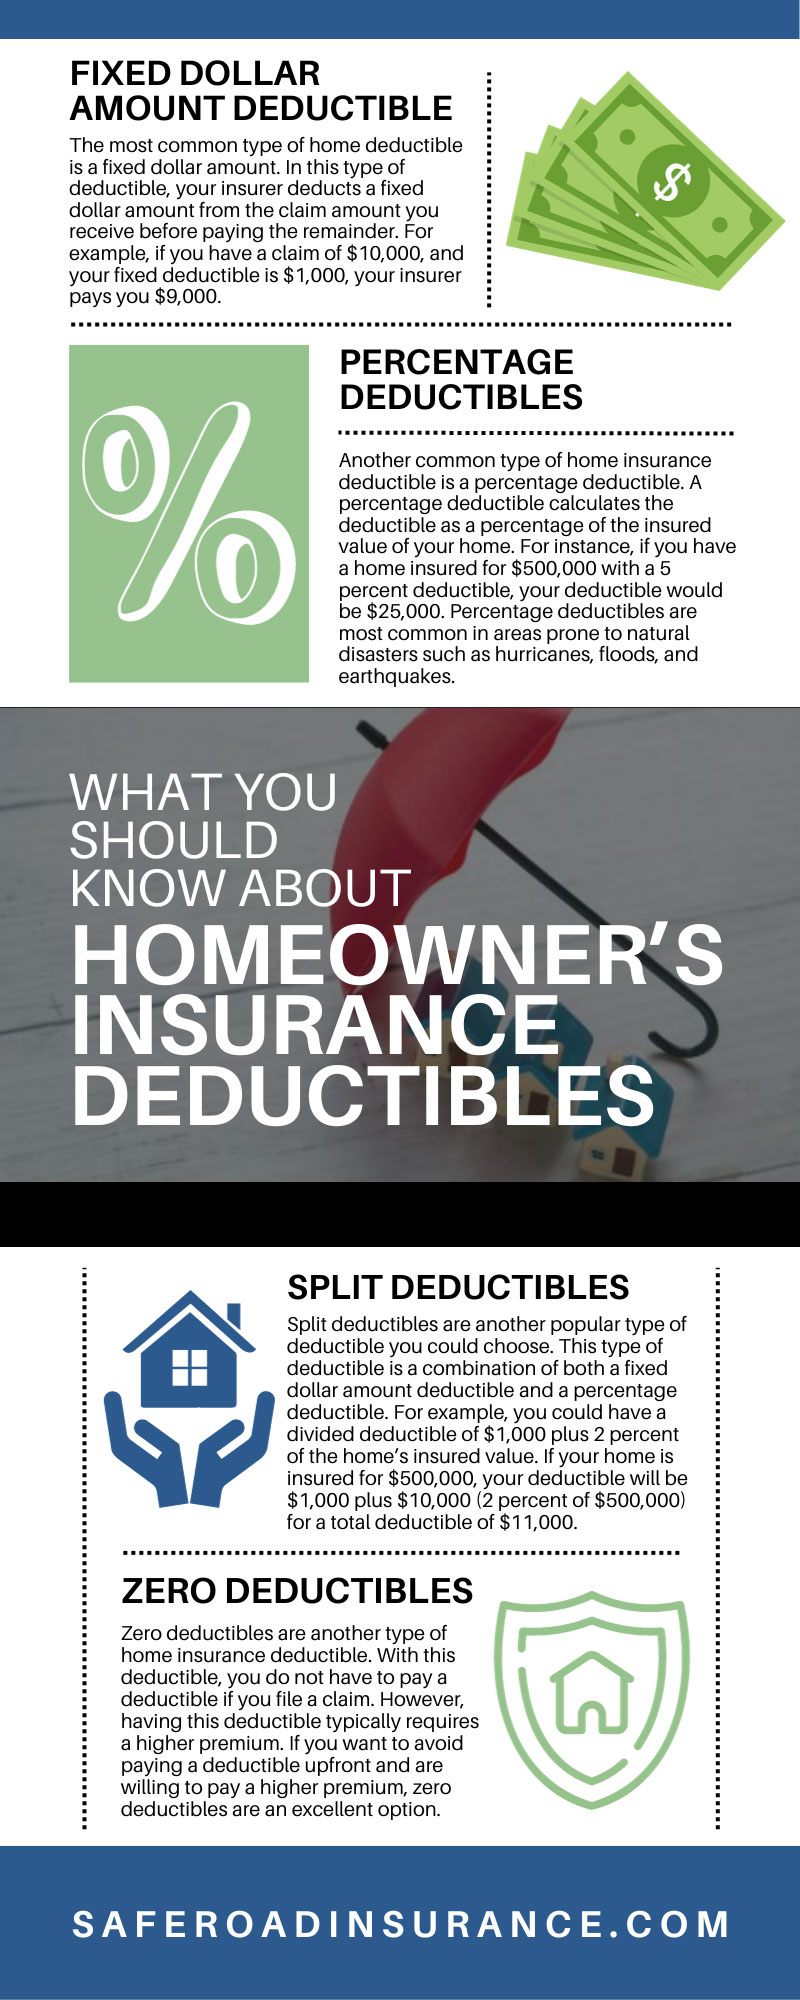 What You Should Know About Homeowner’s Insurance Deductibles